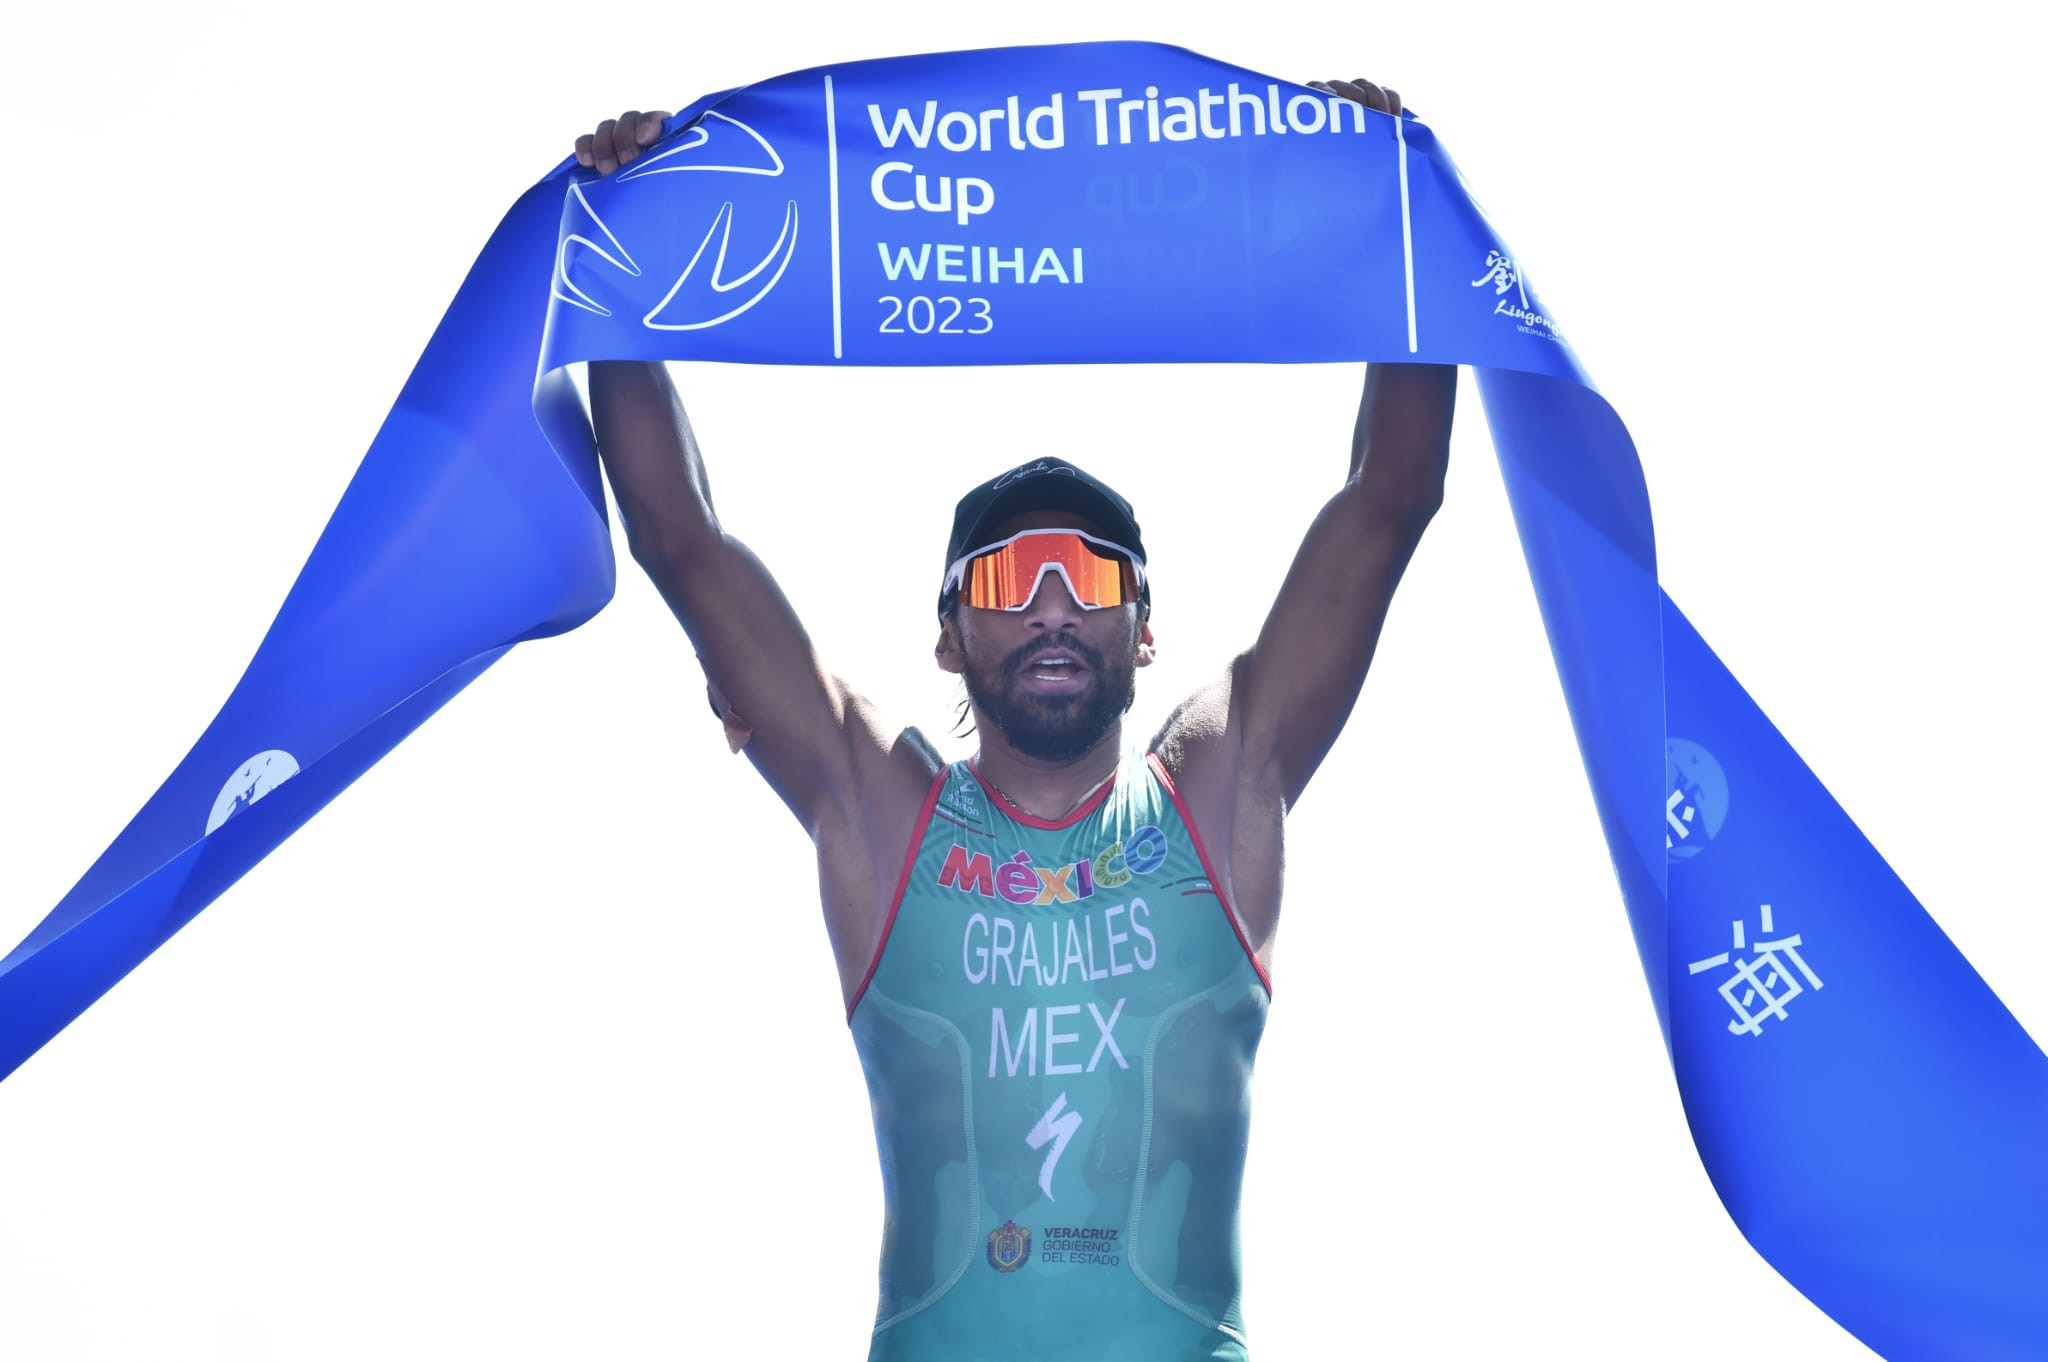 Mexico's Crisanto Grajales triumphed in the men's race at the World Triathlon Cup in Weihai ©World Triathlon